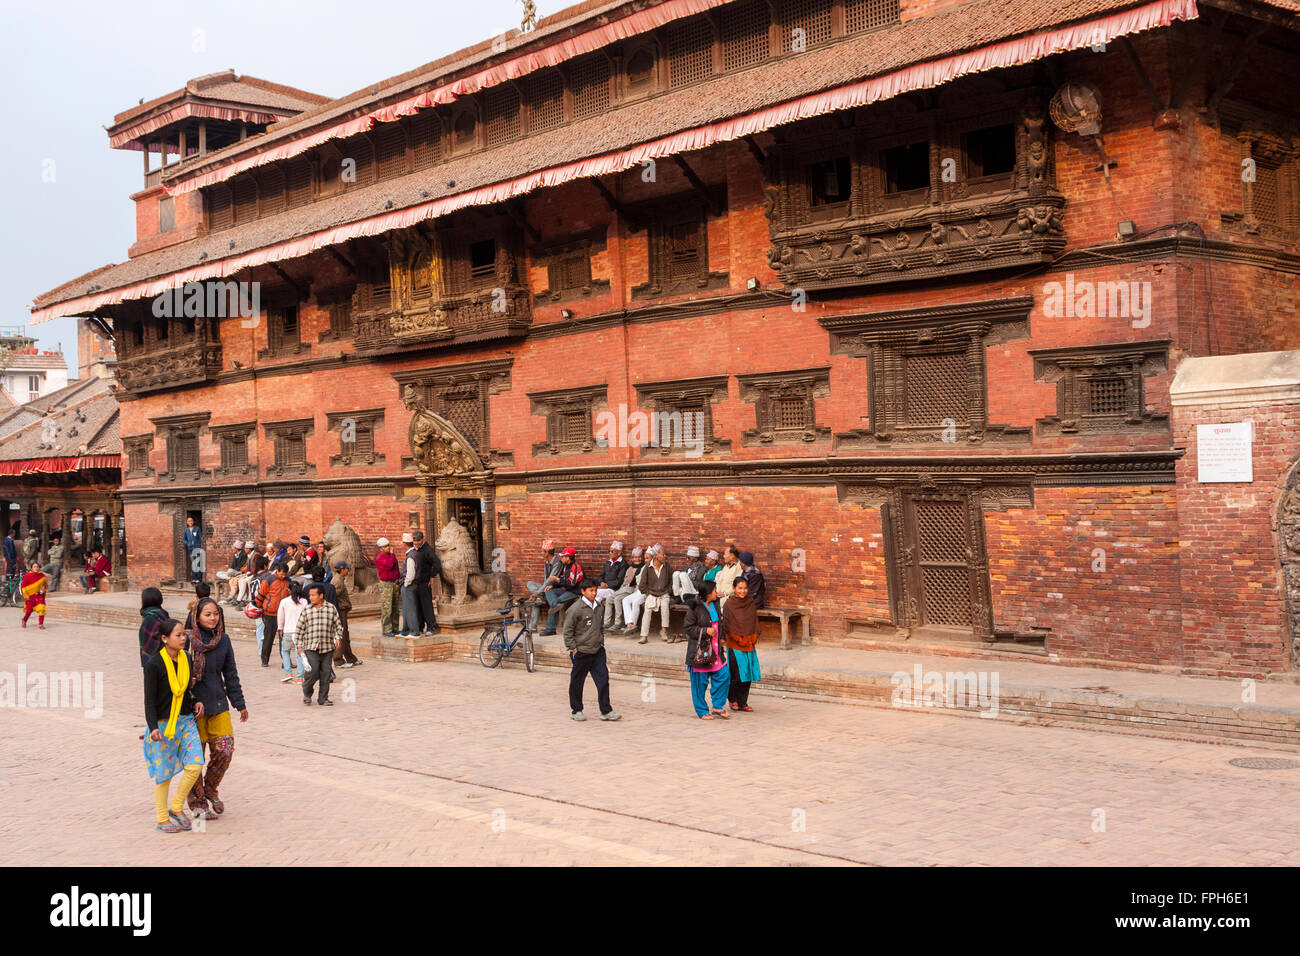 Nepal, Patan.  Durbar Square.  Entrance to the Royal Palace.  March 2, 2009.  The palace survived the April 2015 earthquake. Stock Photo